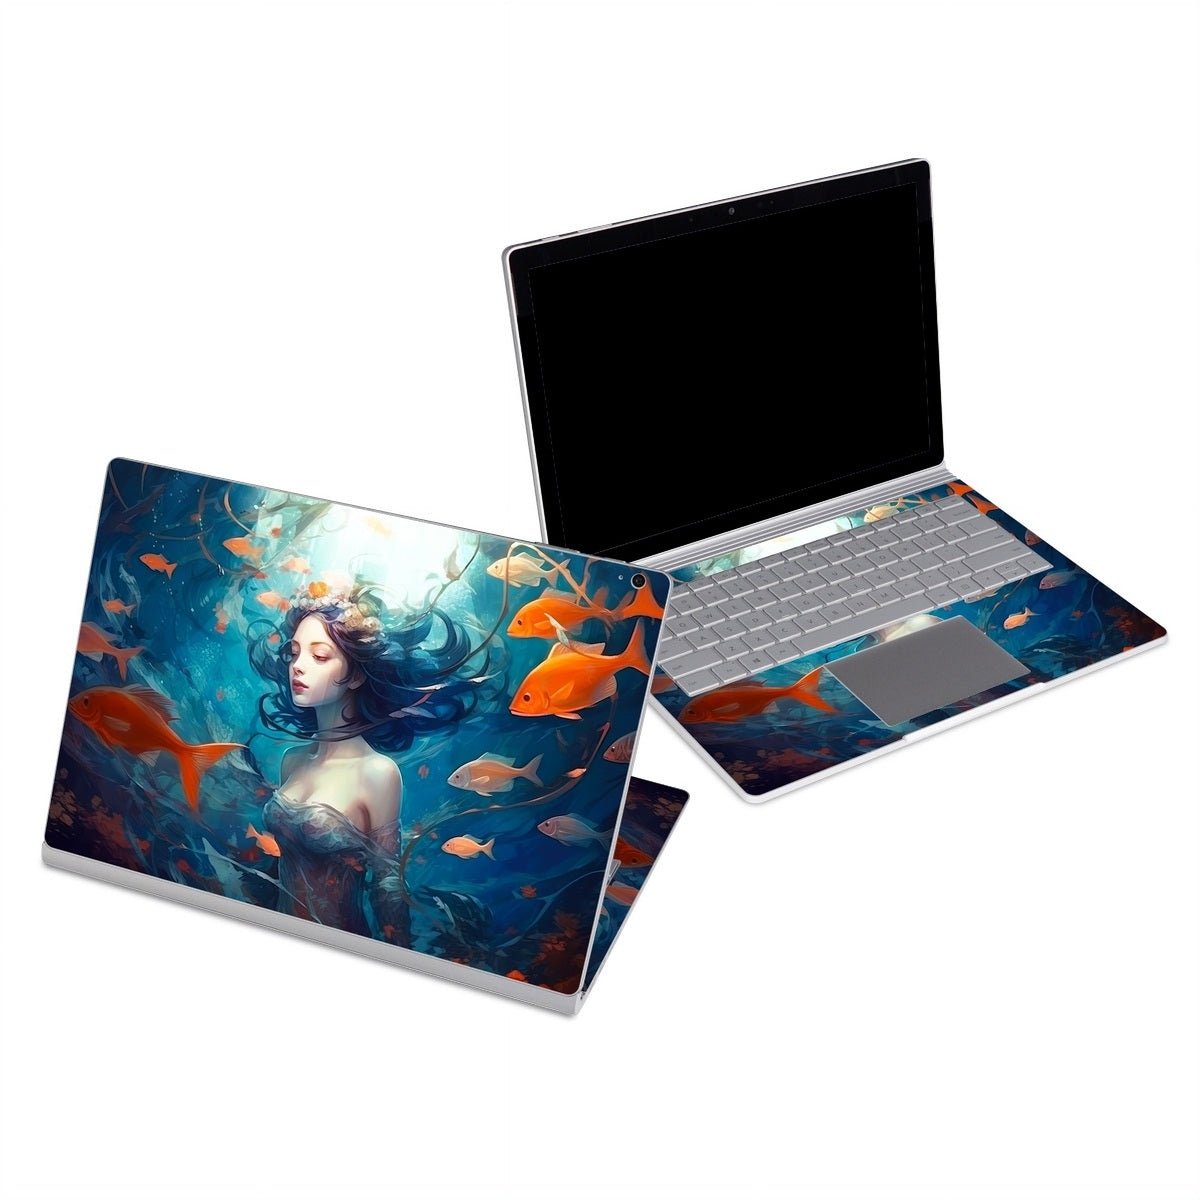 As I Sink - Microsoft Surface Book Skin - Boundless Journey - DecalGirl